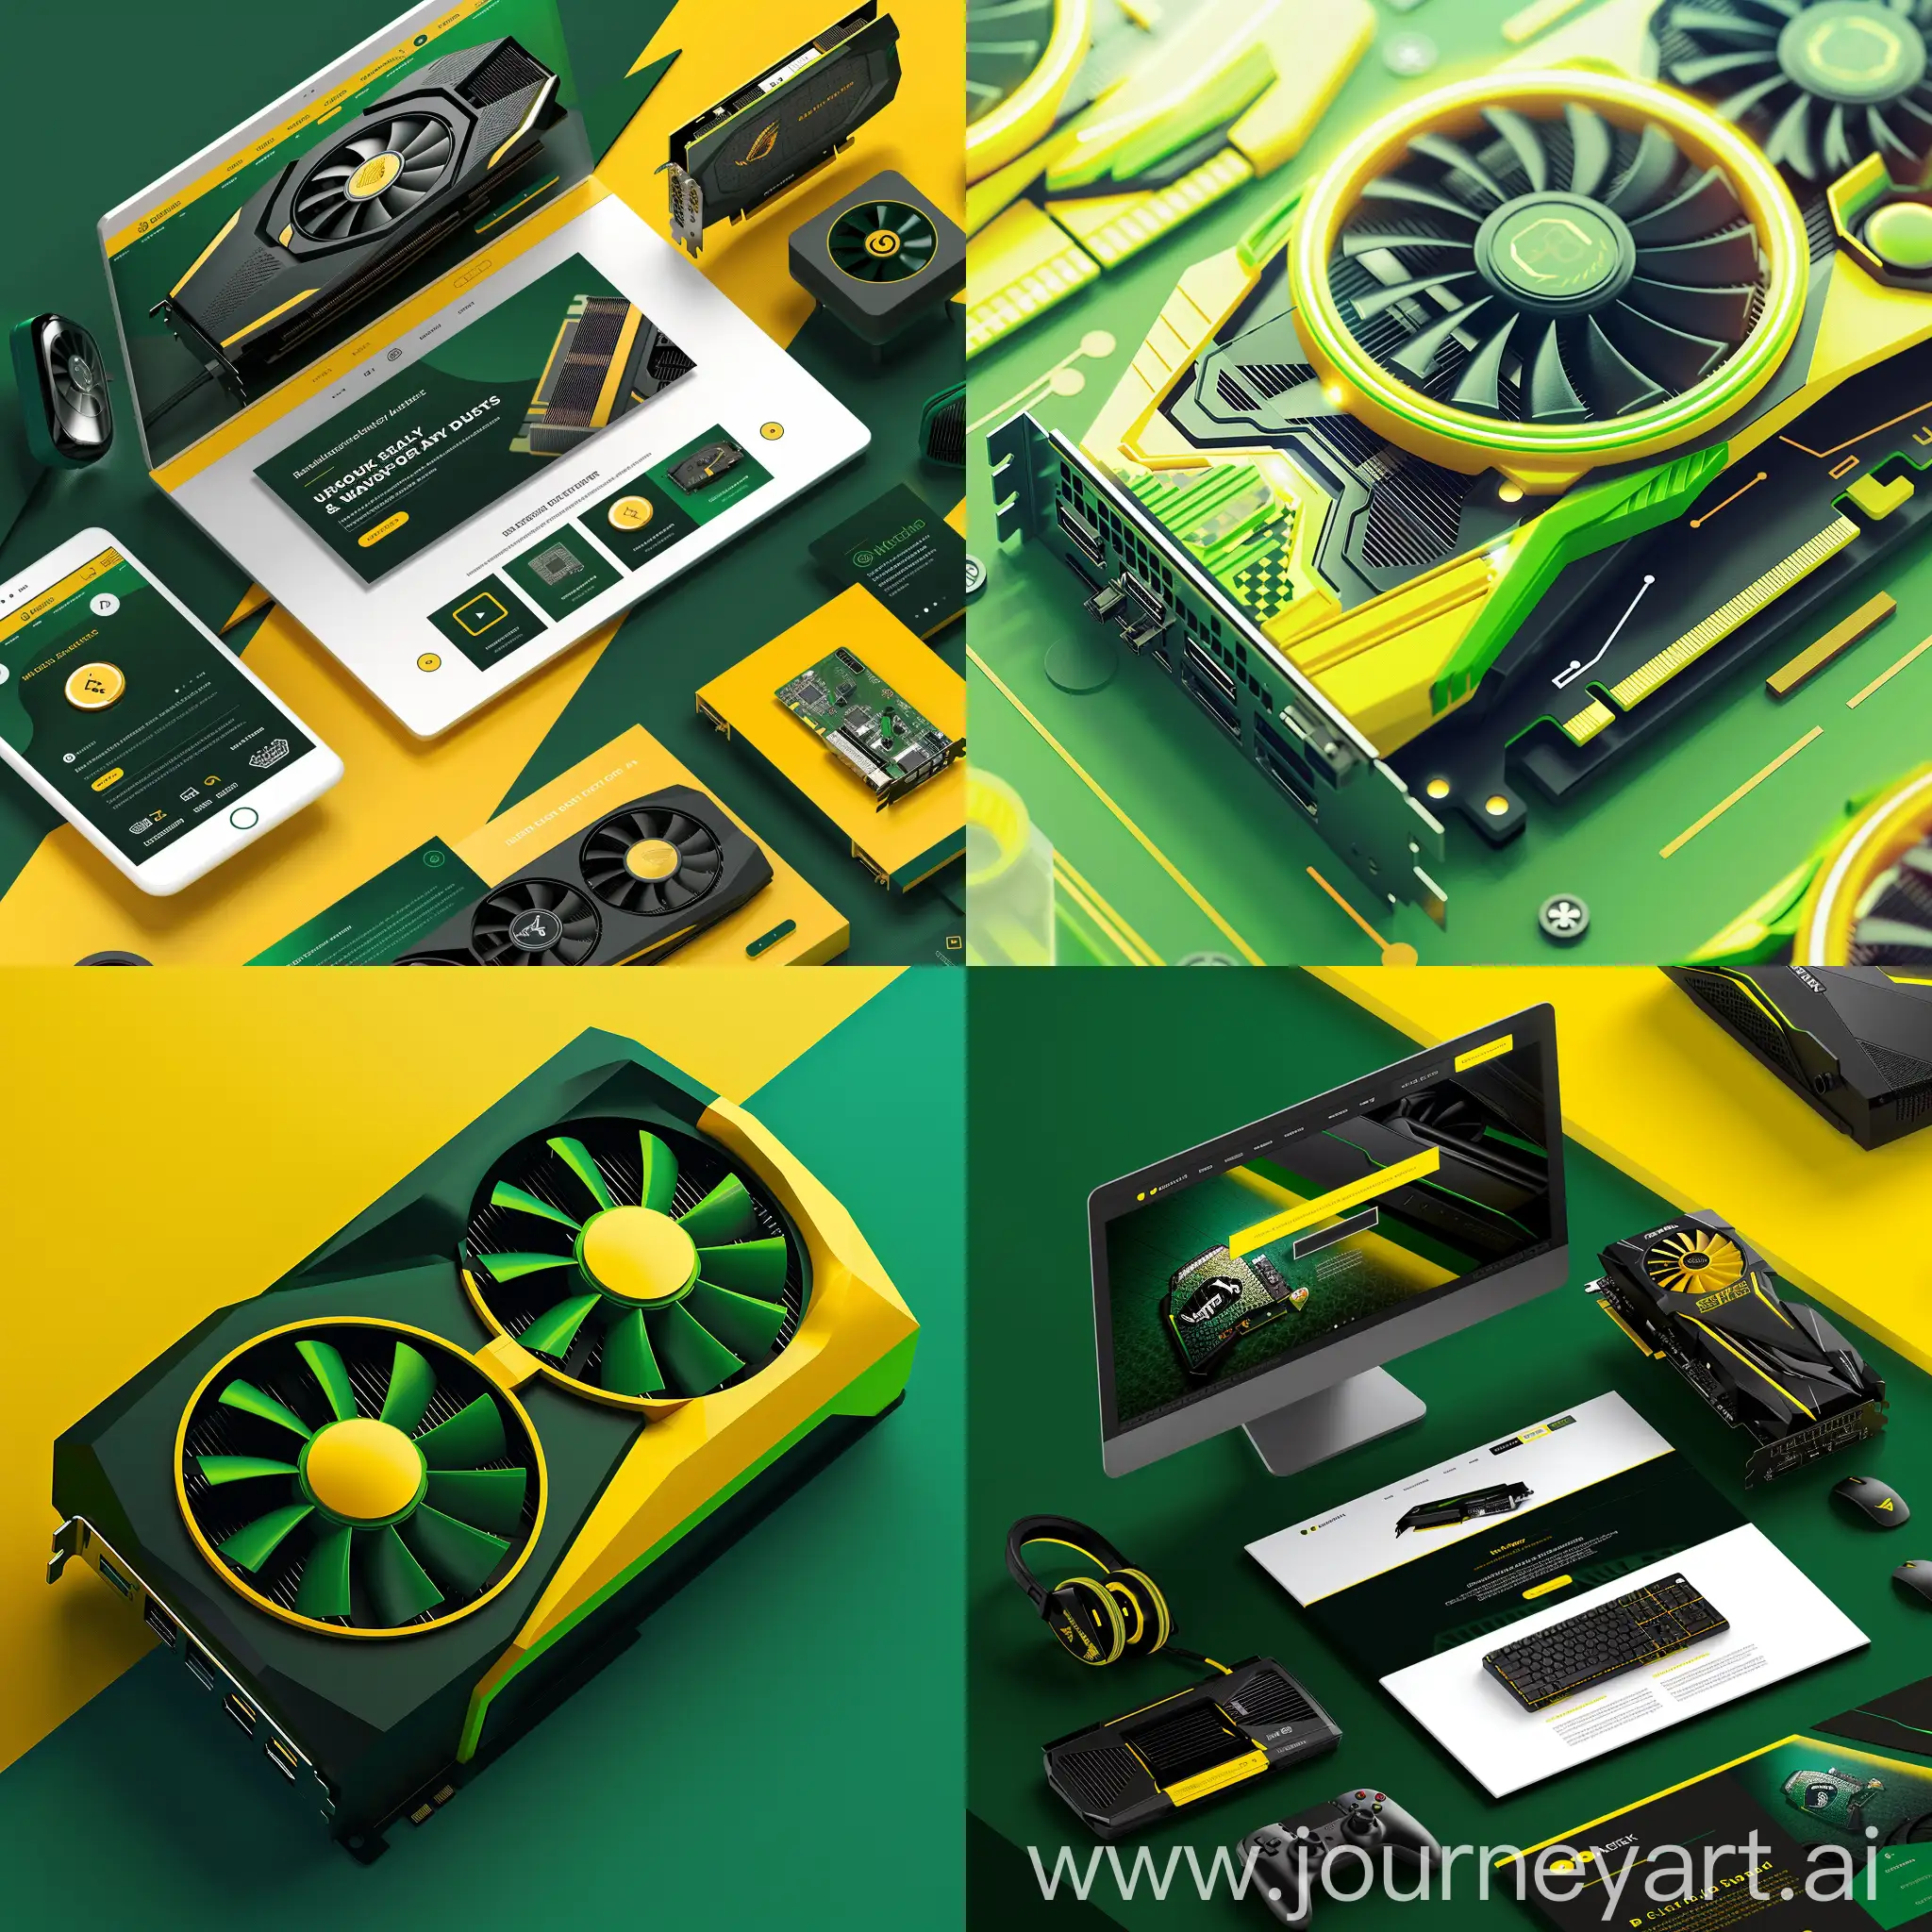 Vibrant-Green-and-Yellow-UIUX-Design-for-Video-Card-Sales-Website